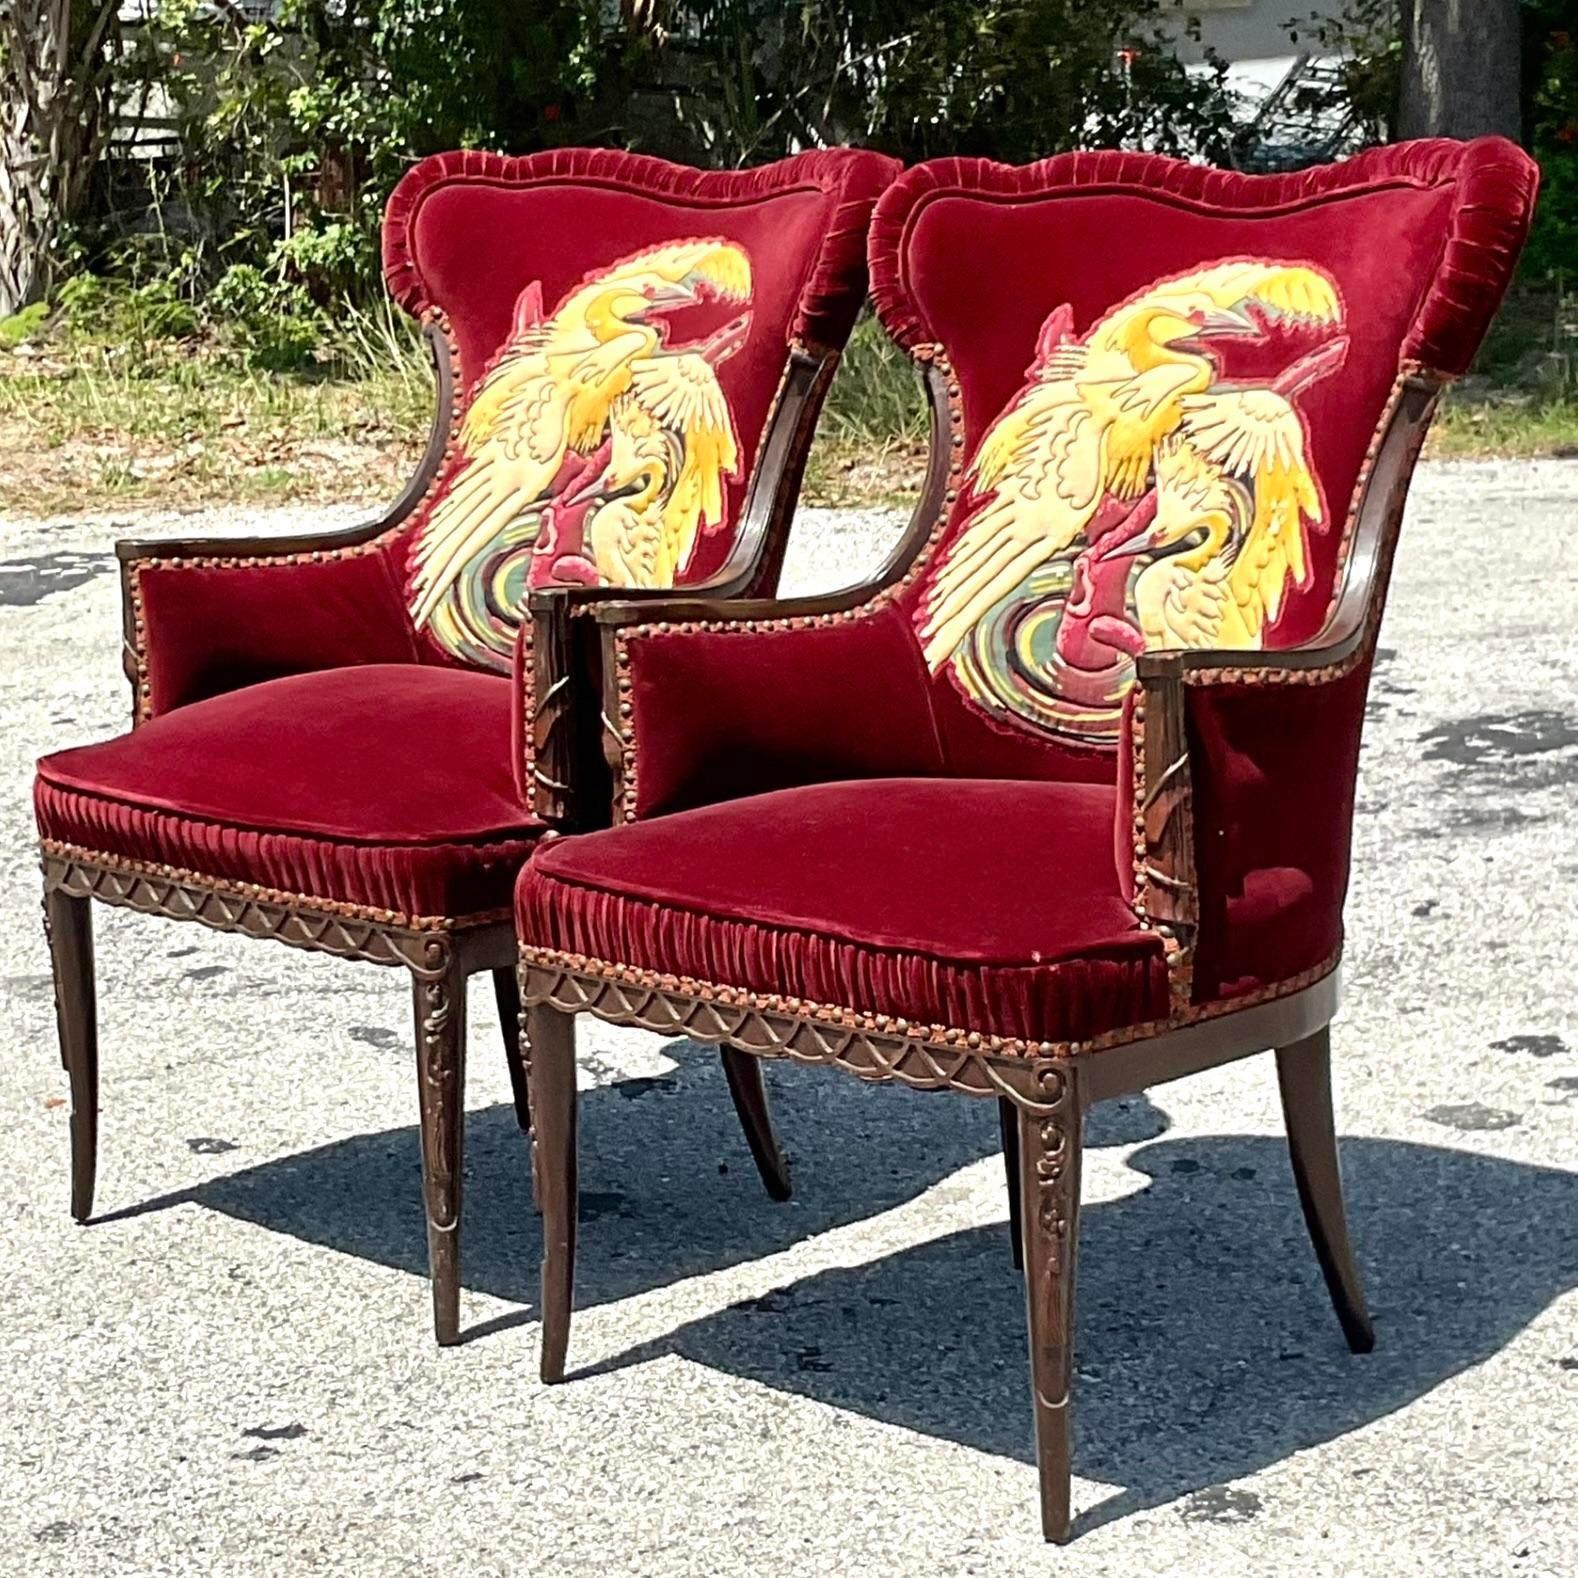 Vintage Boho Ruched Velvet Crane Arm Chairs - a Pair For Sale 2